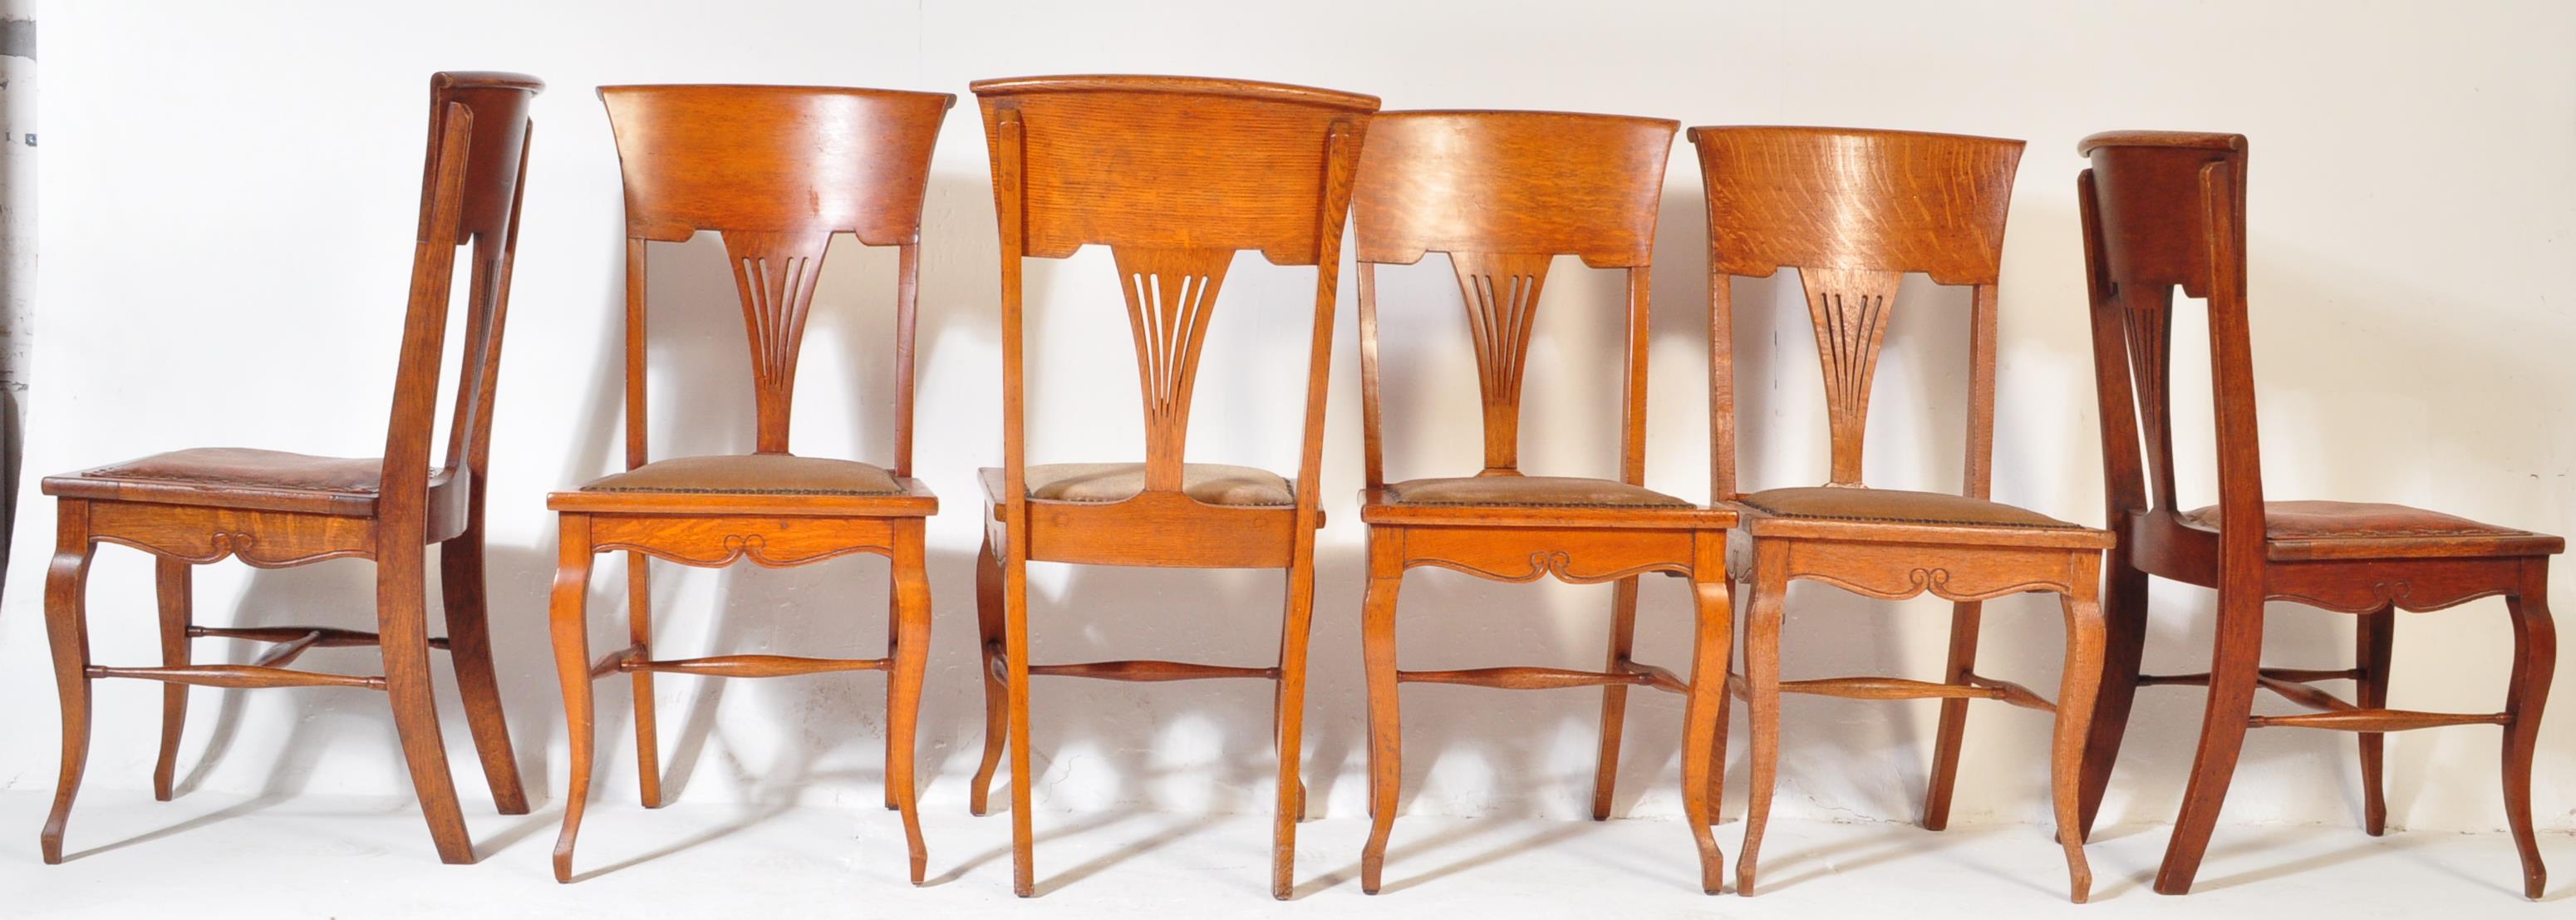 SET OF SIX ARTS & CRAFTS OAK DINING CHAIRS BY P. GANE - Image 3 of 5